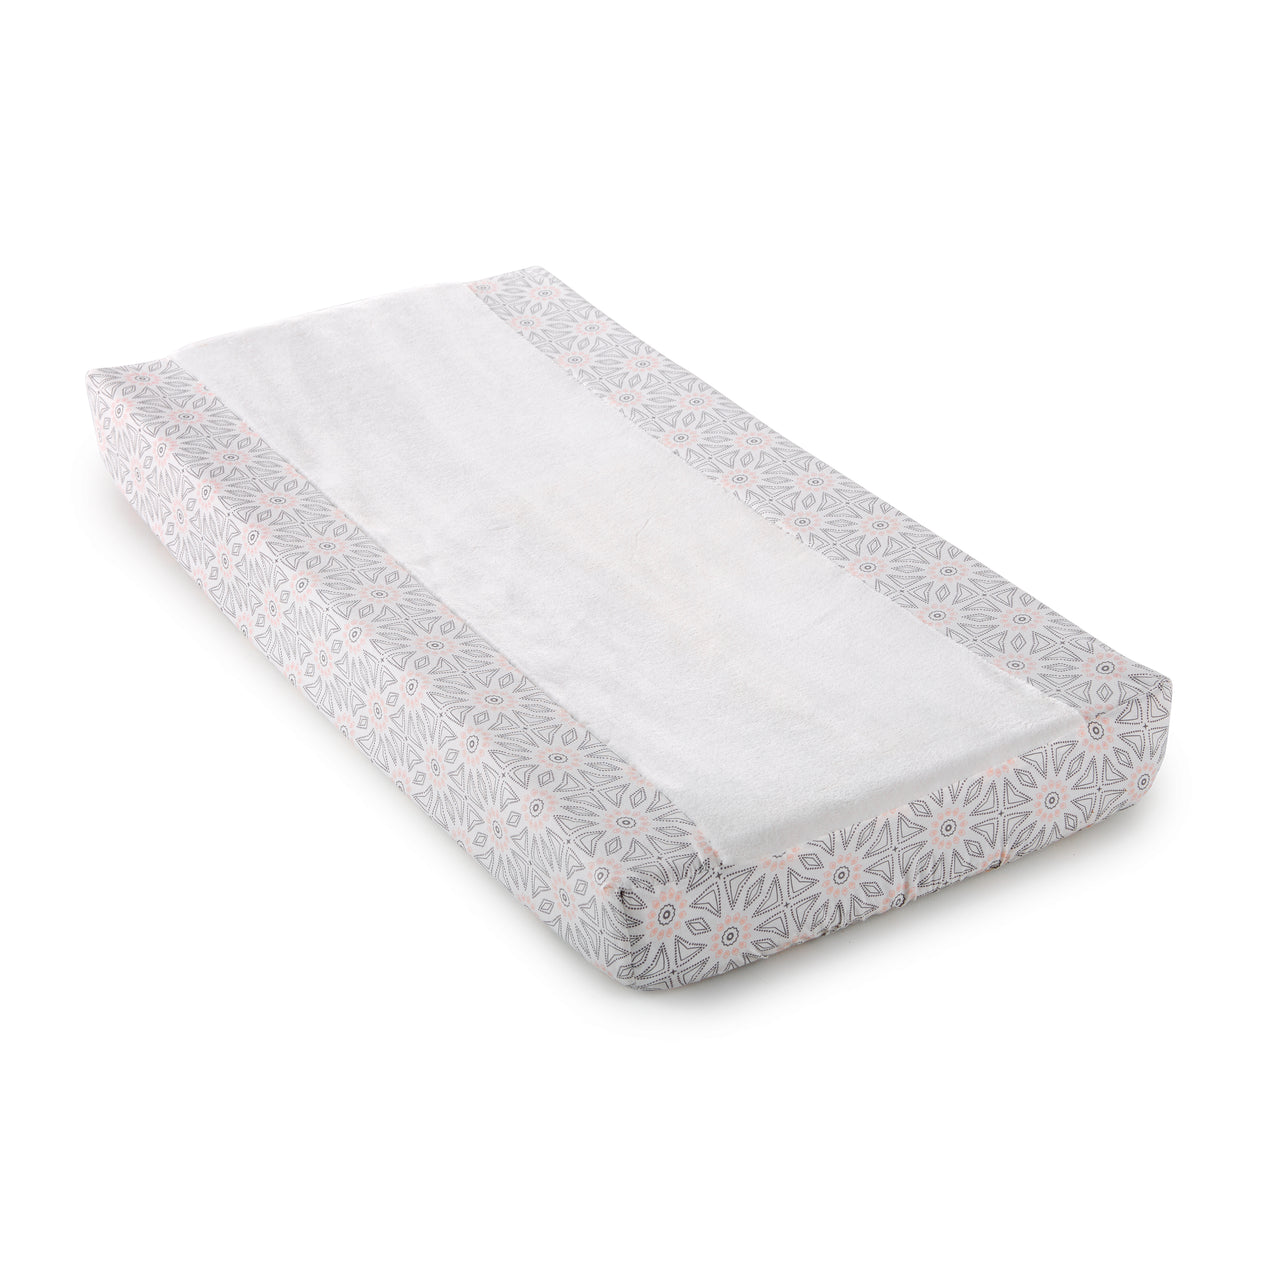 Levtex Baby Imani Changing Pad Cover